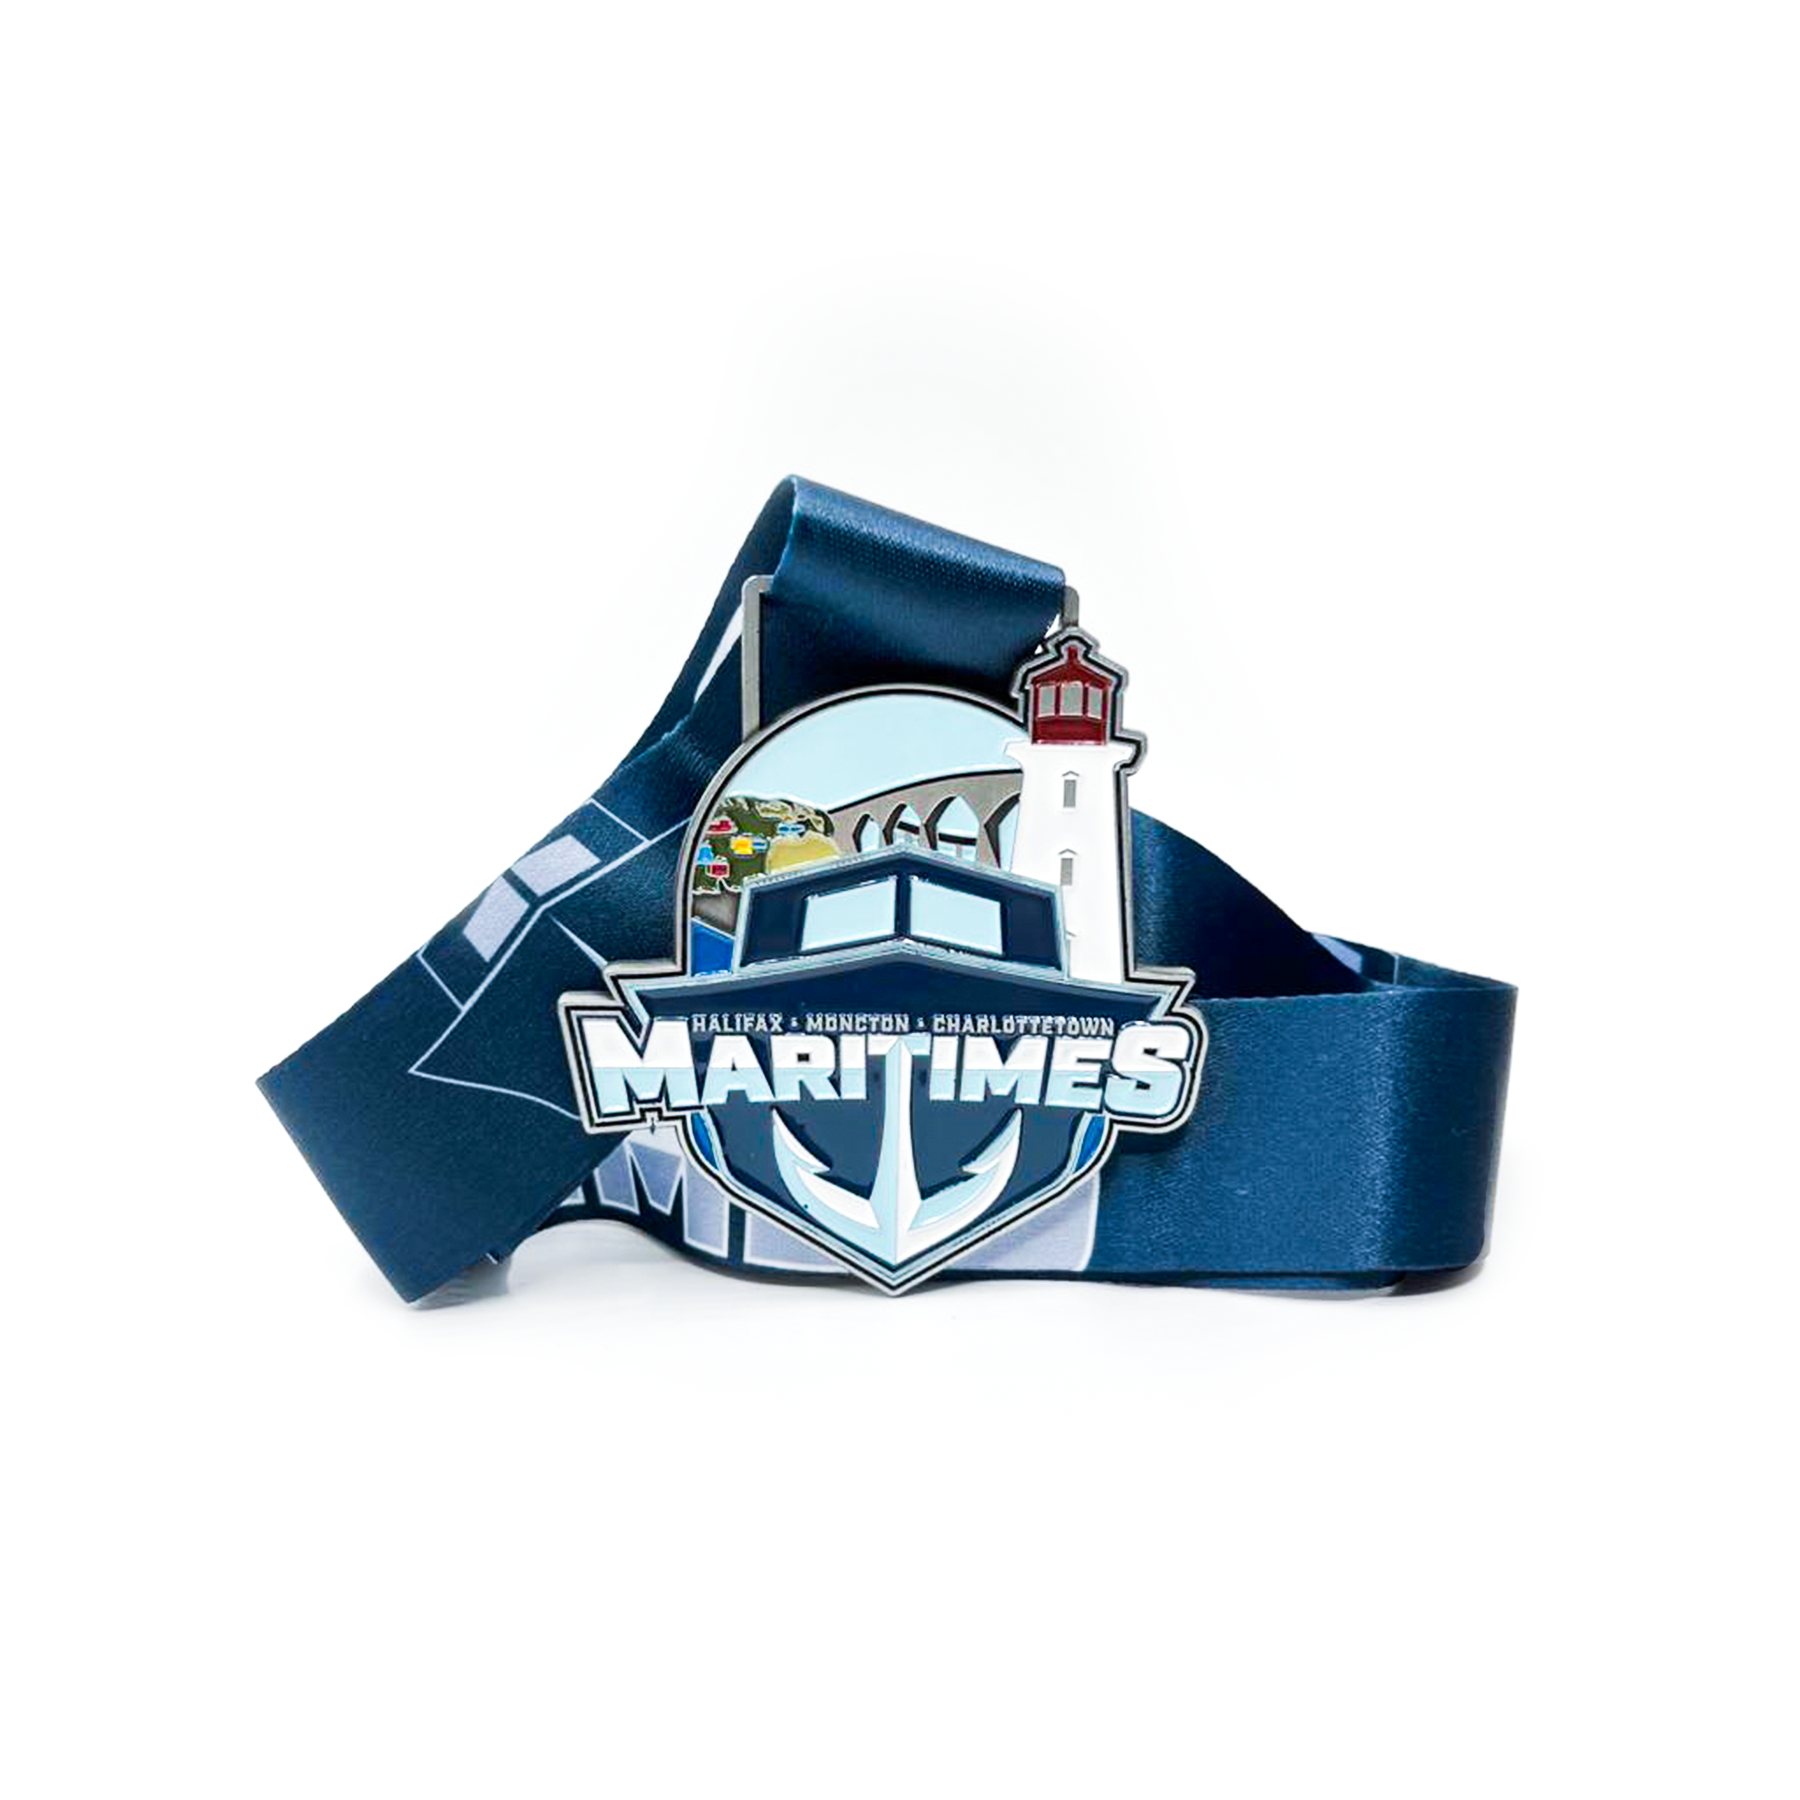 City Series: Maritimes 60k Challenge - Entry + Medal